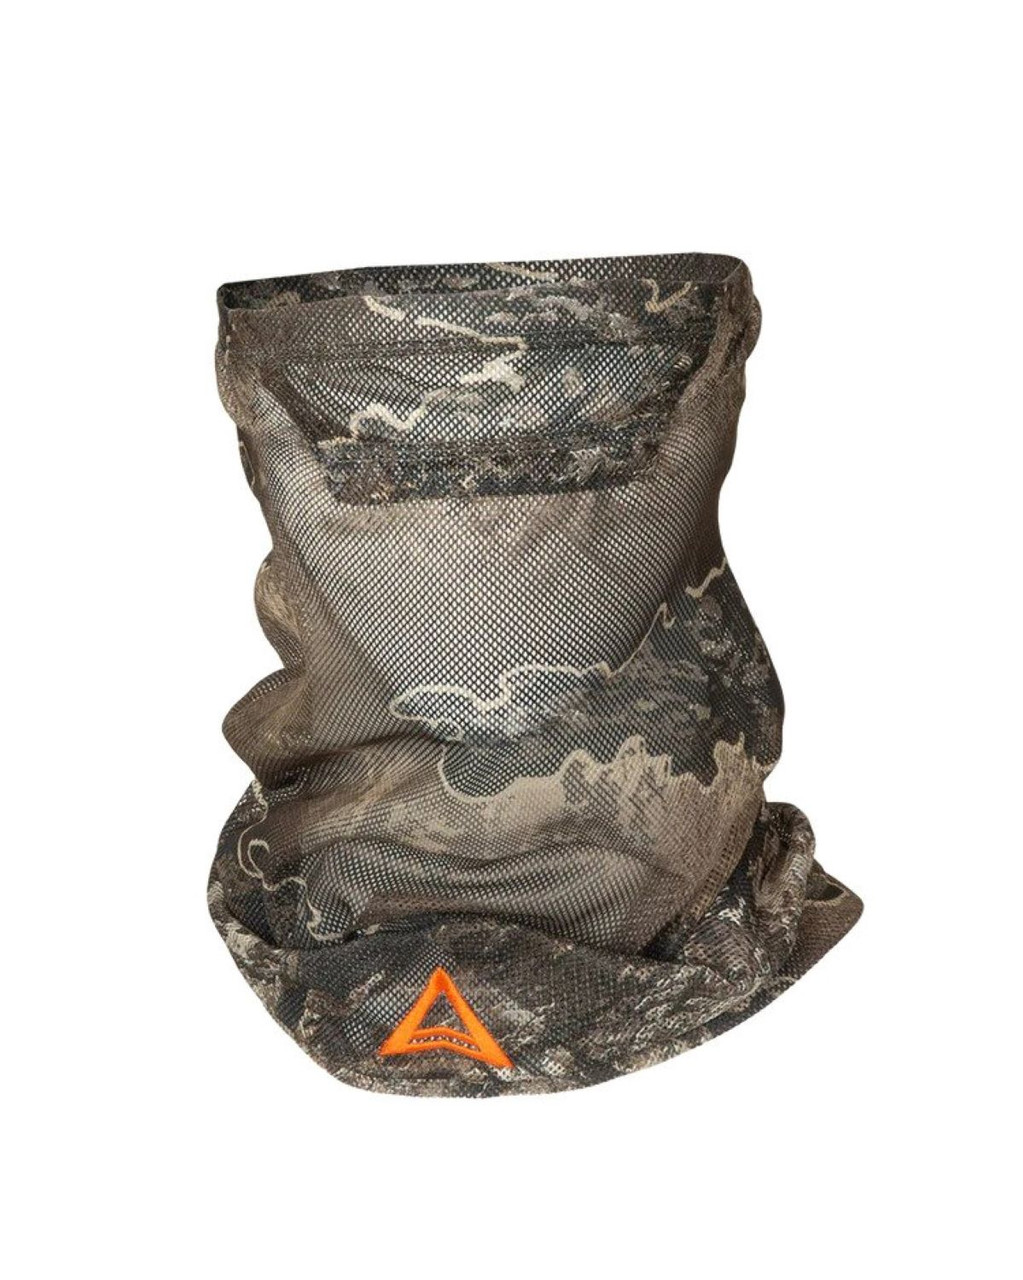 Banded Thacha L-1 Micro Mesh Facemask - Realtree Excape - One Size Fit Most